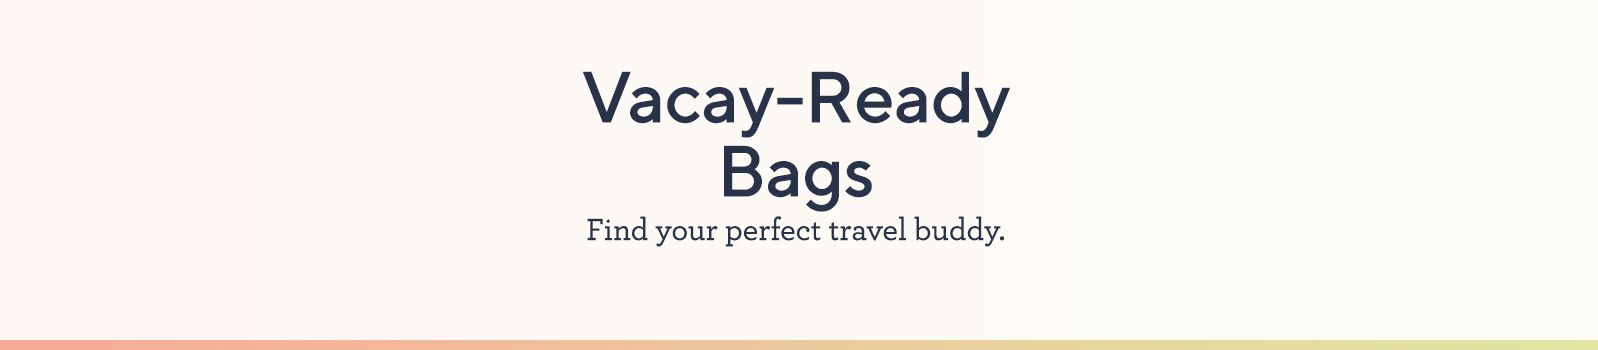 Vacay-Ready Bags: Find your perfect travel buddy.